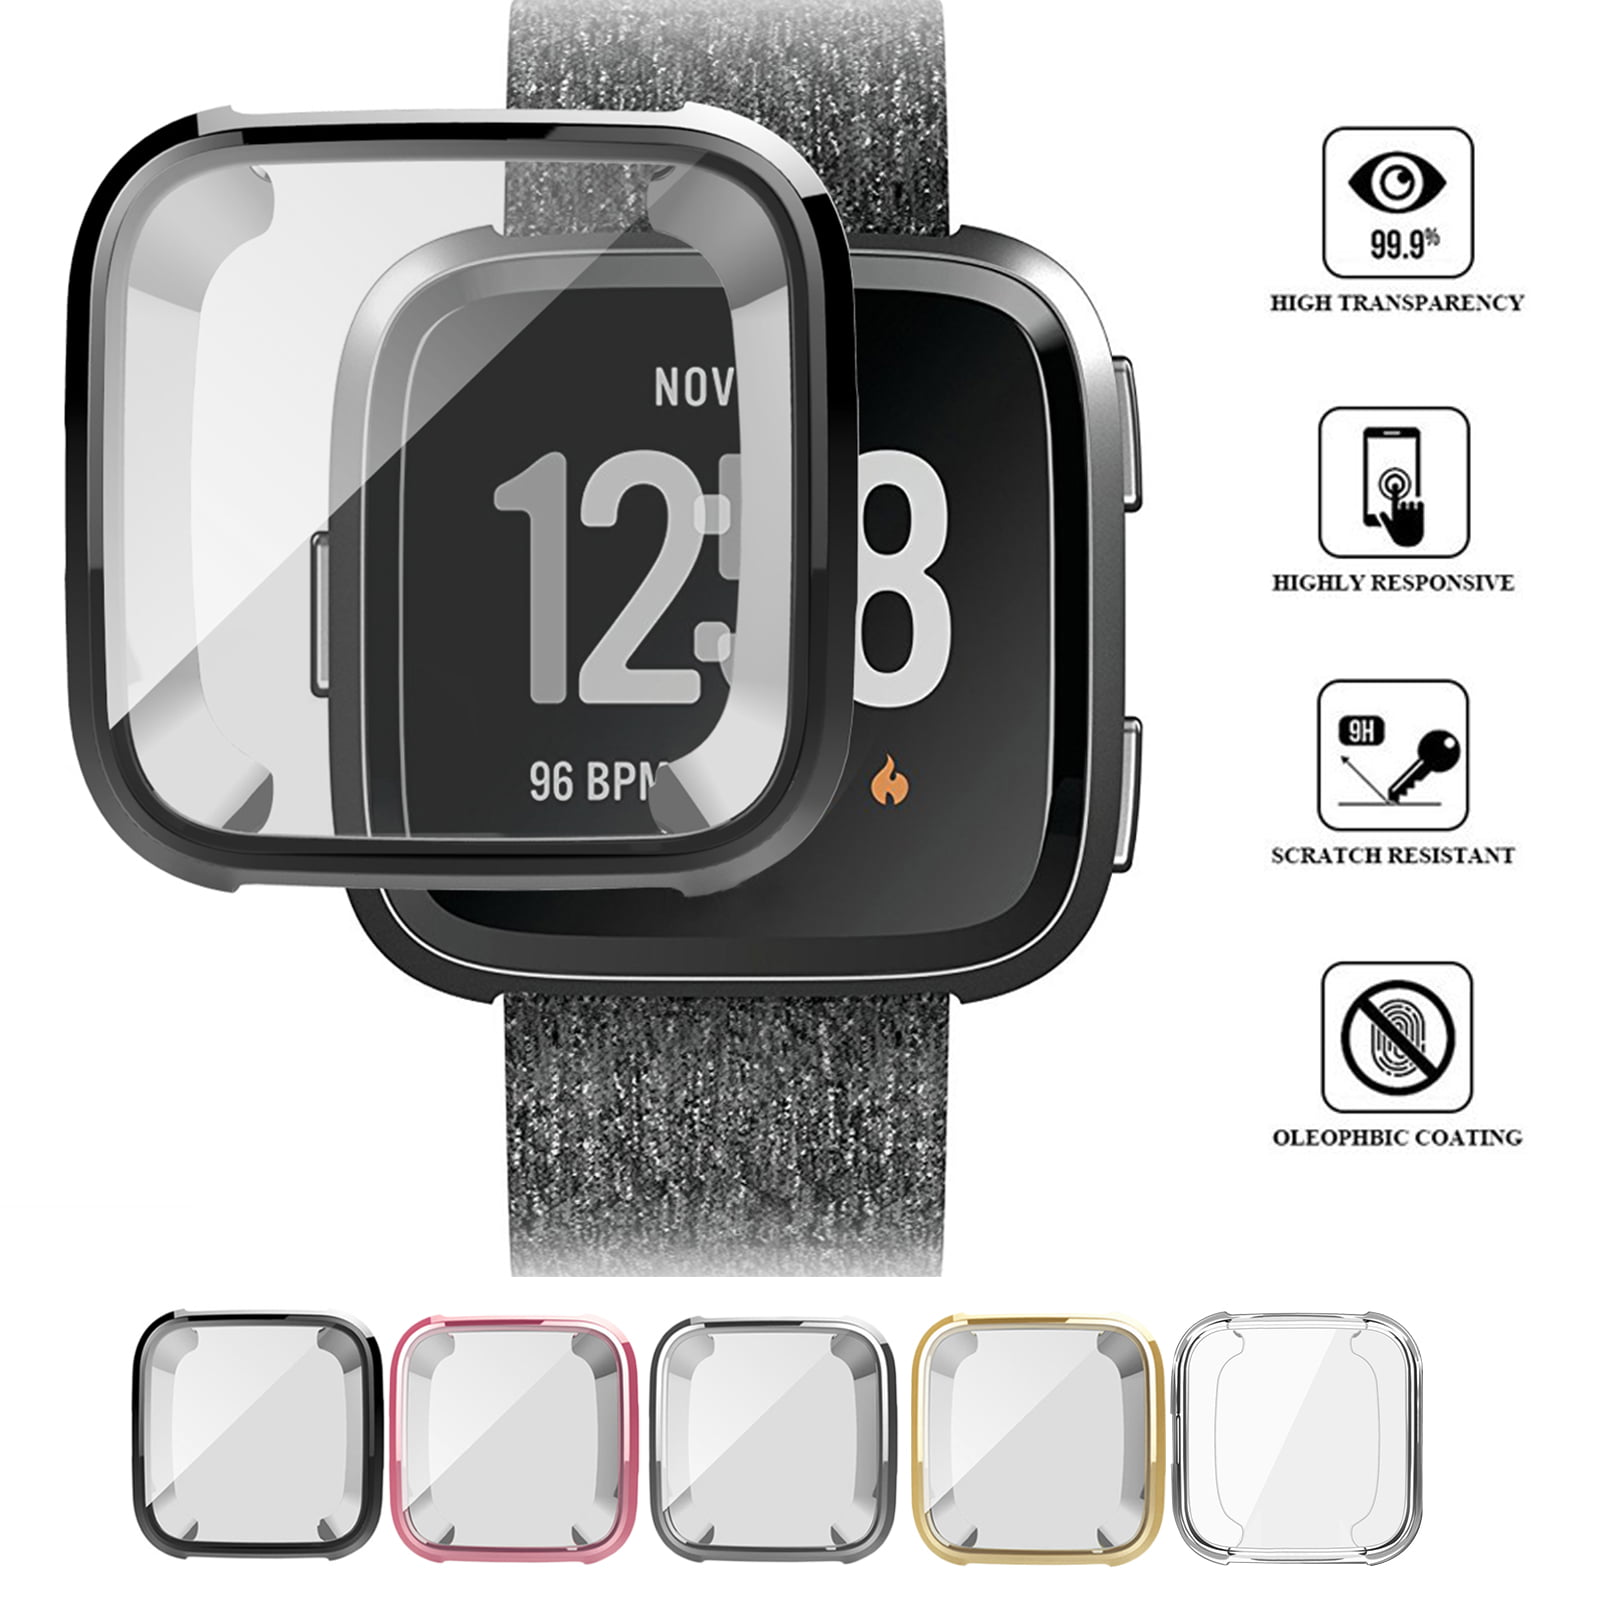 Silicone Protective TPU Shell Case Screen Protector Frame Cover For Fitbit Versa 